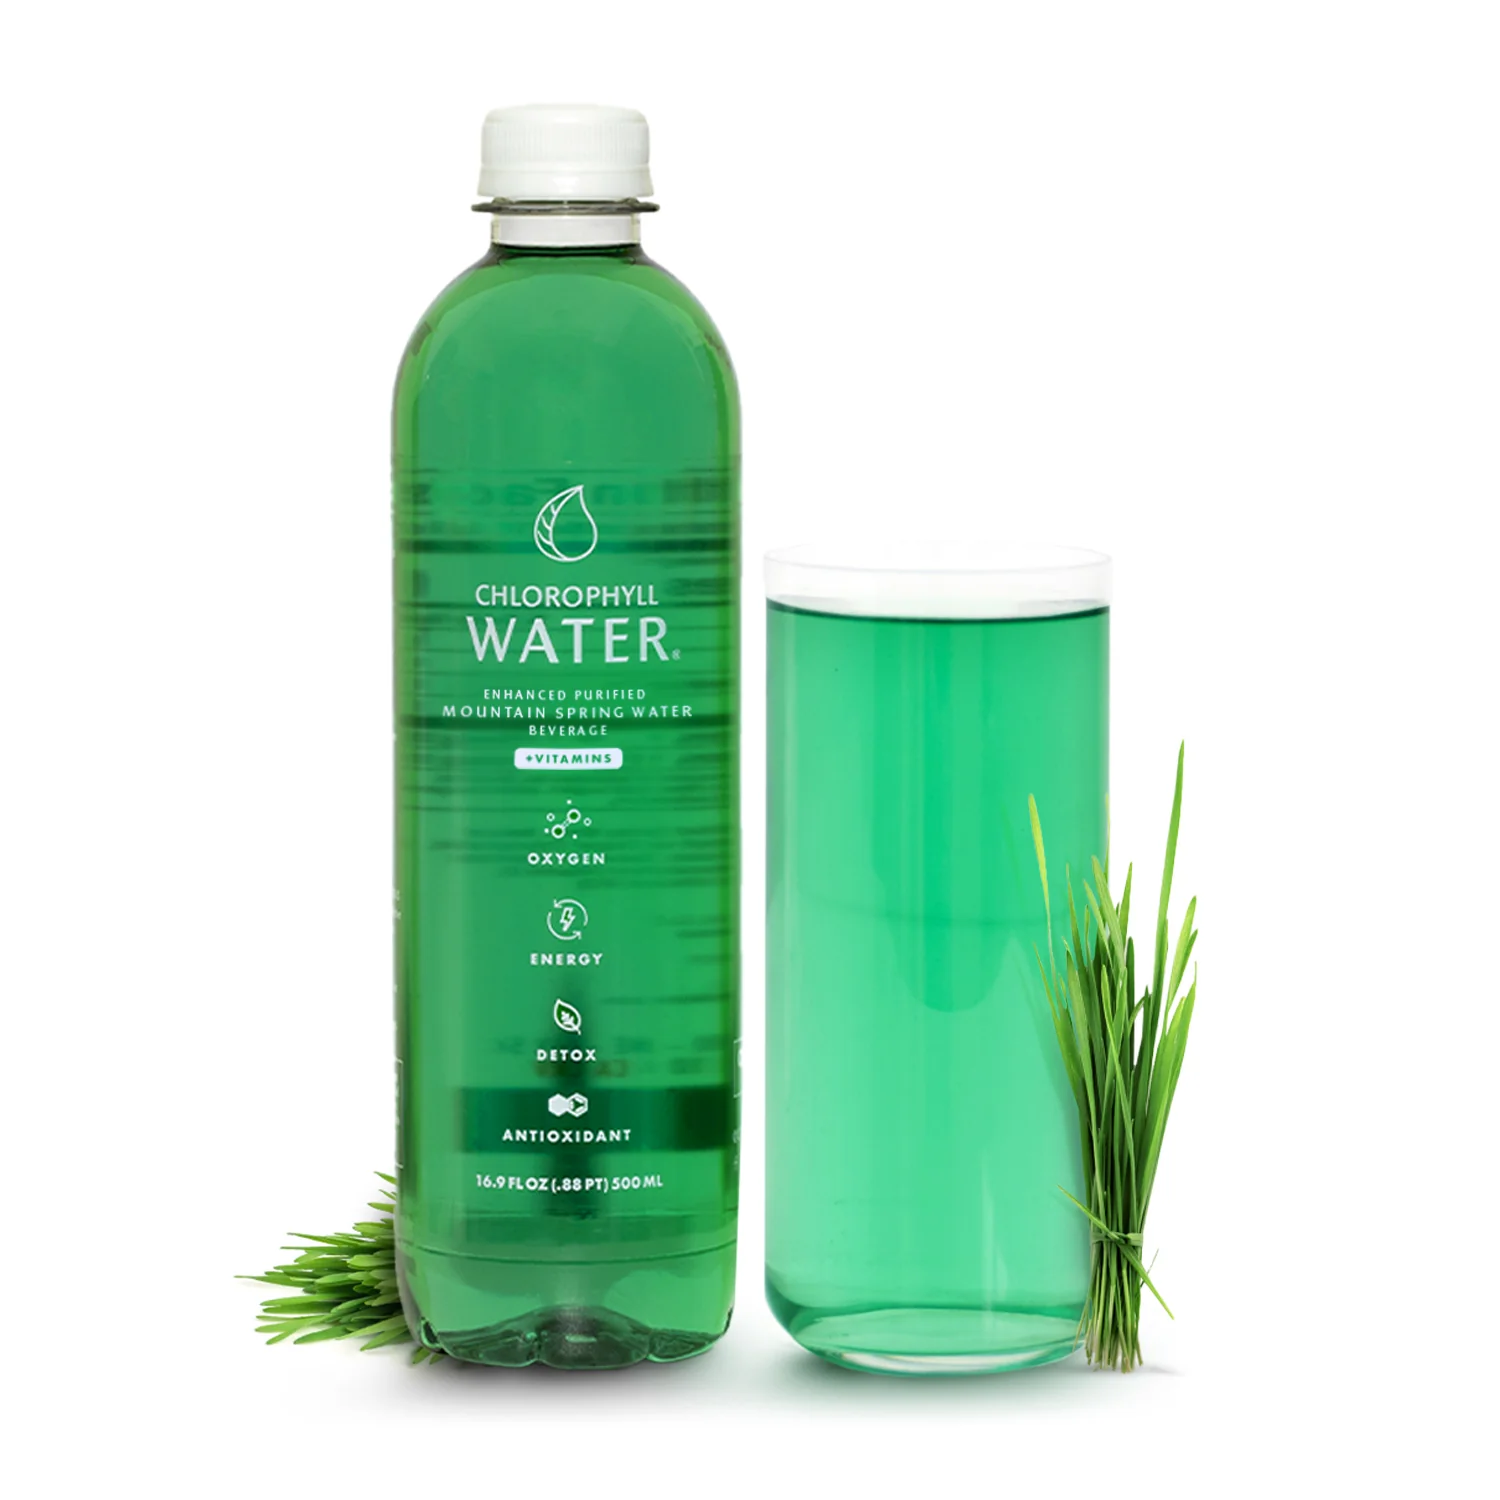 Chlorophyll Water bottled review and promo code